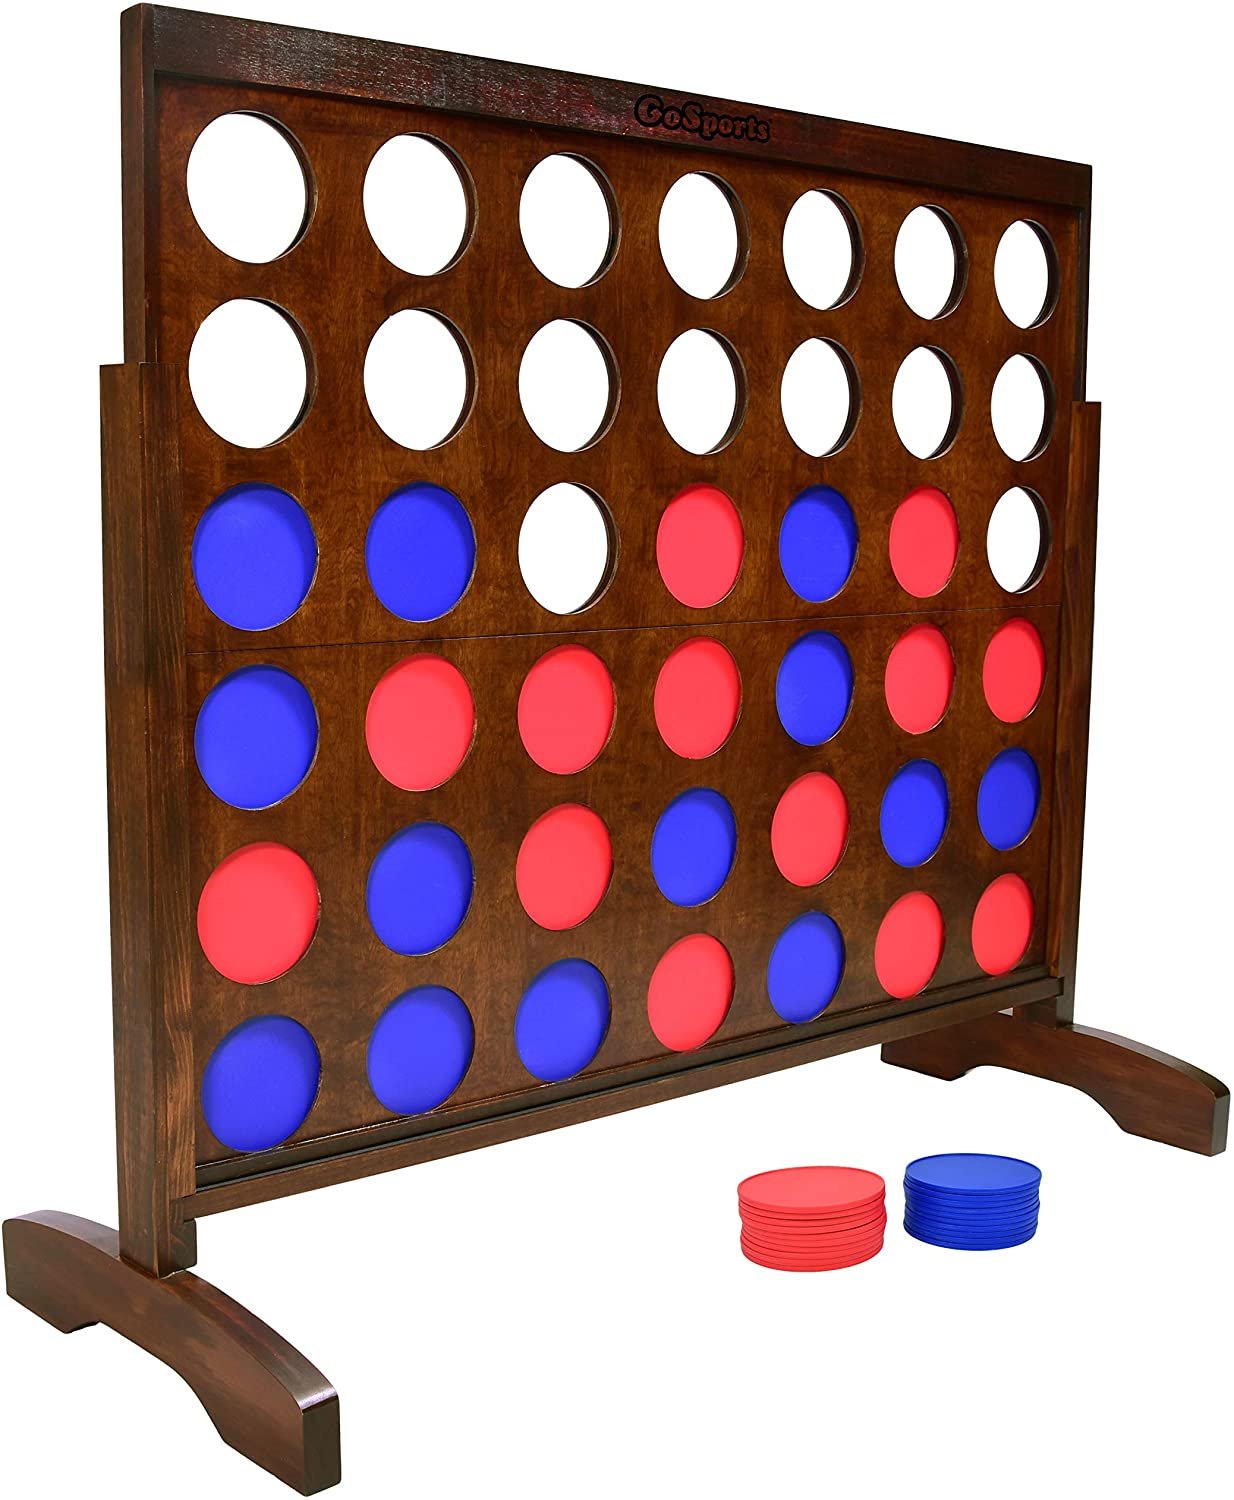 Connect 4 (3ft by 4ft).jpg